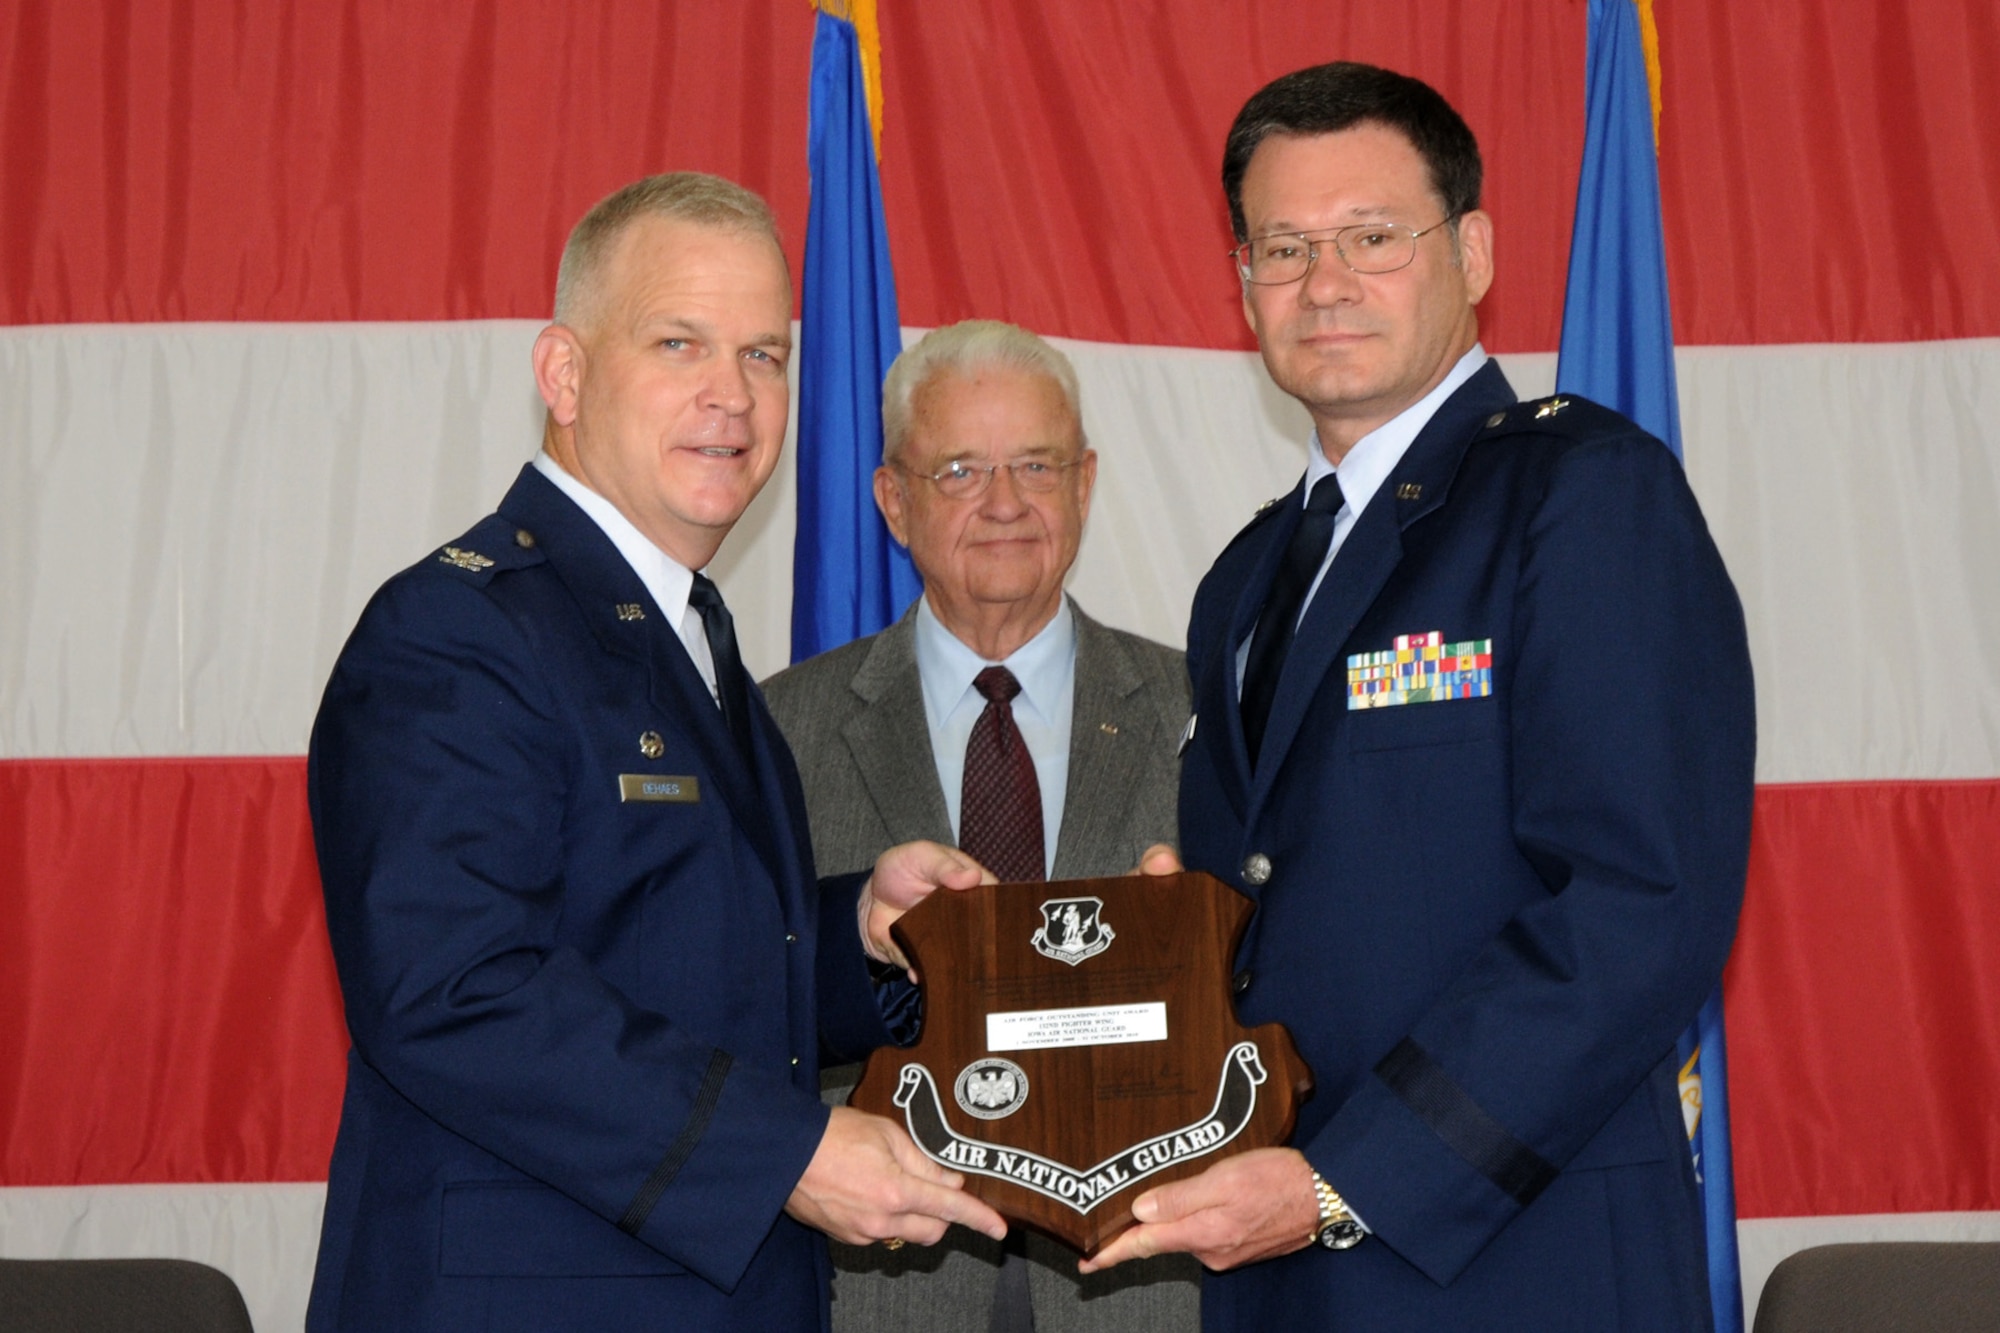 Brig. Gen. Derek Hill (right), Deputy Adjutant General of the IA Air National Guard, presents Col. Drew DeHaes (left), Commander of the 132nd Fighter Wing (132FW), Des Moines, Iowa with the Air Force Outstanding Unit award during the 2011 Awards Ceremony held in the hangar of the 132FW on November 6, 2011.  The Honorable Leonard Boswell (middle), Representative from the State of Iowa, observes.  (US Air Force photo/Staff Sgt. Linda E. Kephart)(Released)